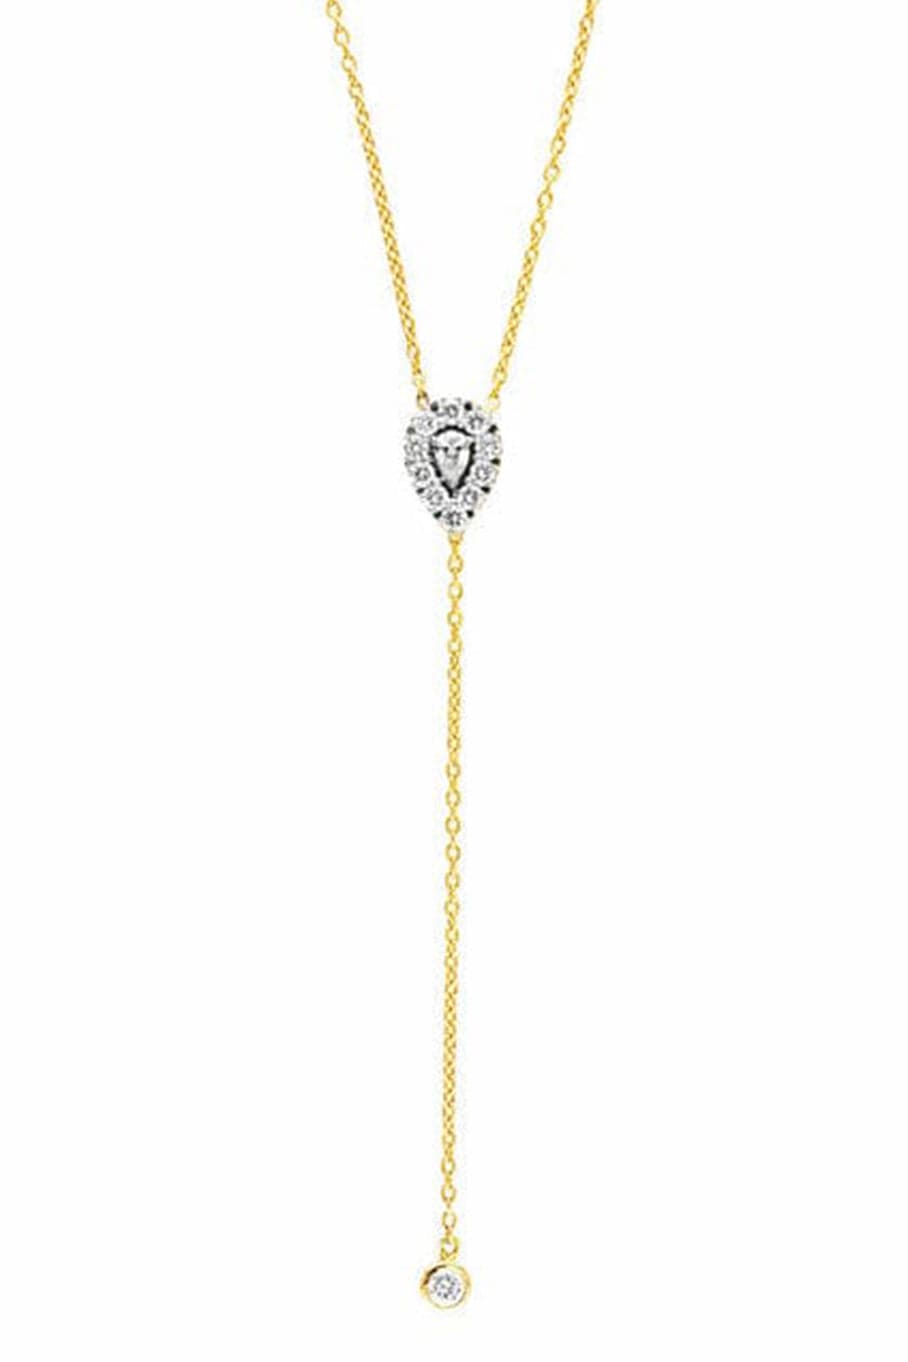 ALESSA JEWELRY-Clique Momentum Pear Y Necklace-ROSE GOLD